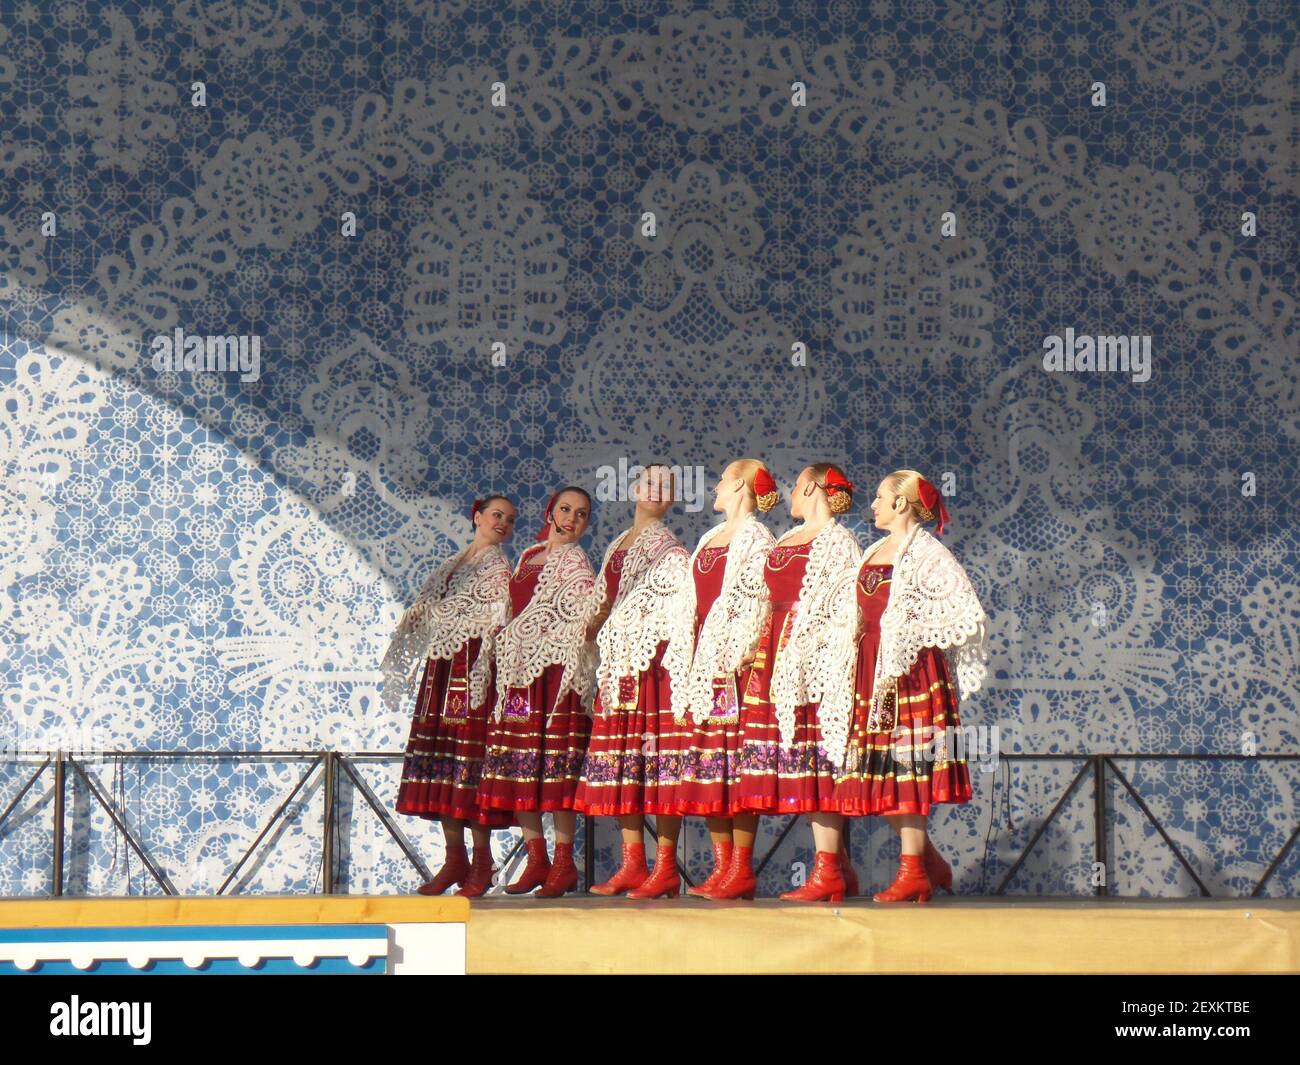 A musical group performs on the stage at Olympic Park during the Sochi 2014 Winter Games, in Sochi, Russia, Friday, Feb. 14, 2014. (Photo by Michelle Kaufman/Miami Herald/MCT/Sipa USA) Stock Photo